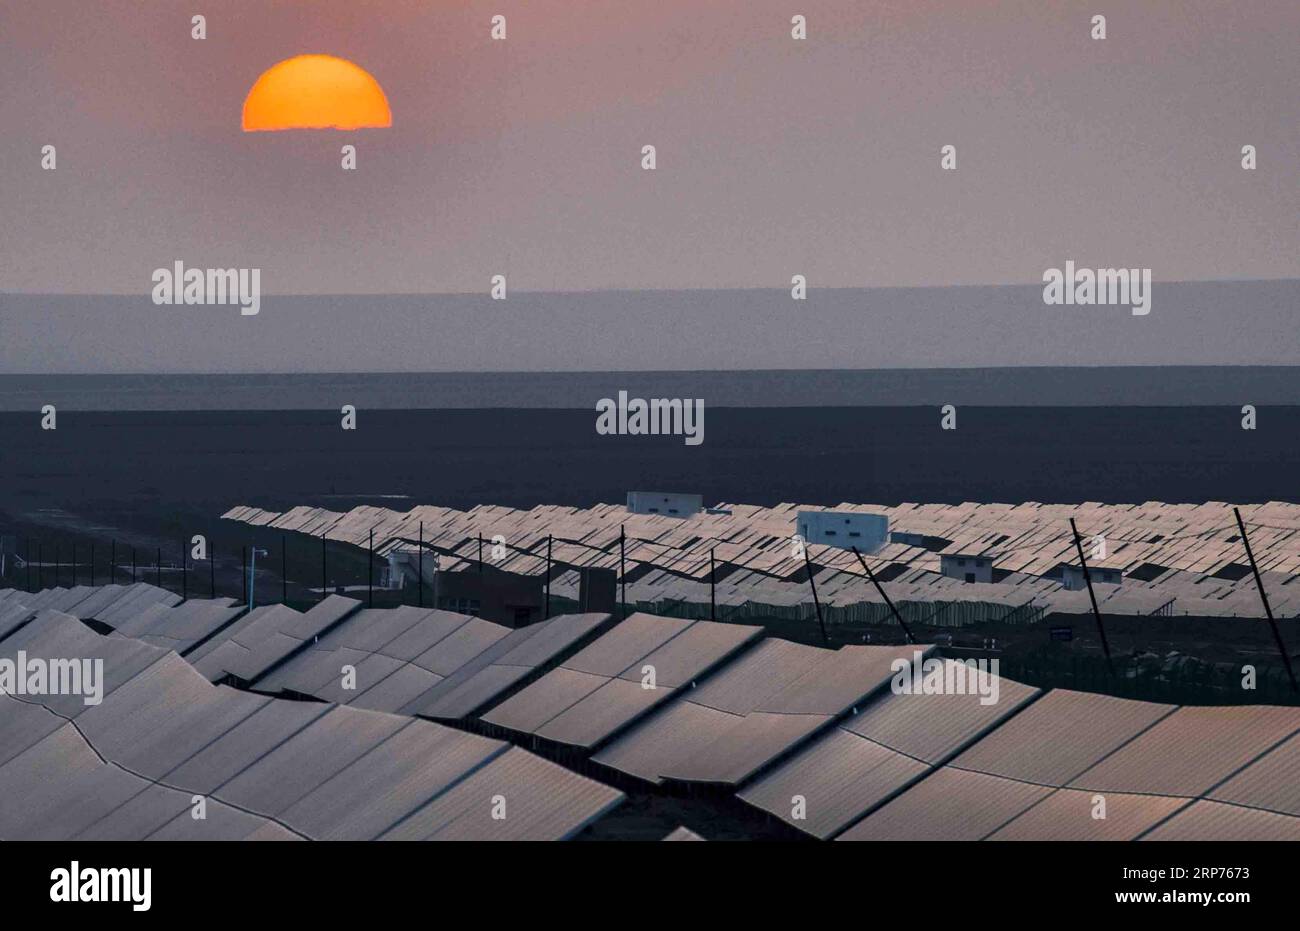 (190129) -- BEIJING, Jan. 29, 2019 (Xinhua) -- Photo taken on Sept. 18, 2018 shows a photovoltaic power plant in Turpan, northwest China s Xinjiang Uygur Autonomous Region. New energy power generation saw double digit growth last year in northwest China s Xinjiang Uygur Autonomous Region amid efforts to reduce coal consumption to improve the energy mix. Wind and solar power generation rose 15.2 percent and 13.6 percent to 36 billion kwh and 11.7 billion kwh respectively, according to the regional development and reform commission. It said 22.9 percent of installed wind power generating capacit Stock Photo